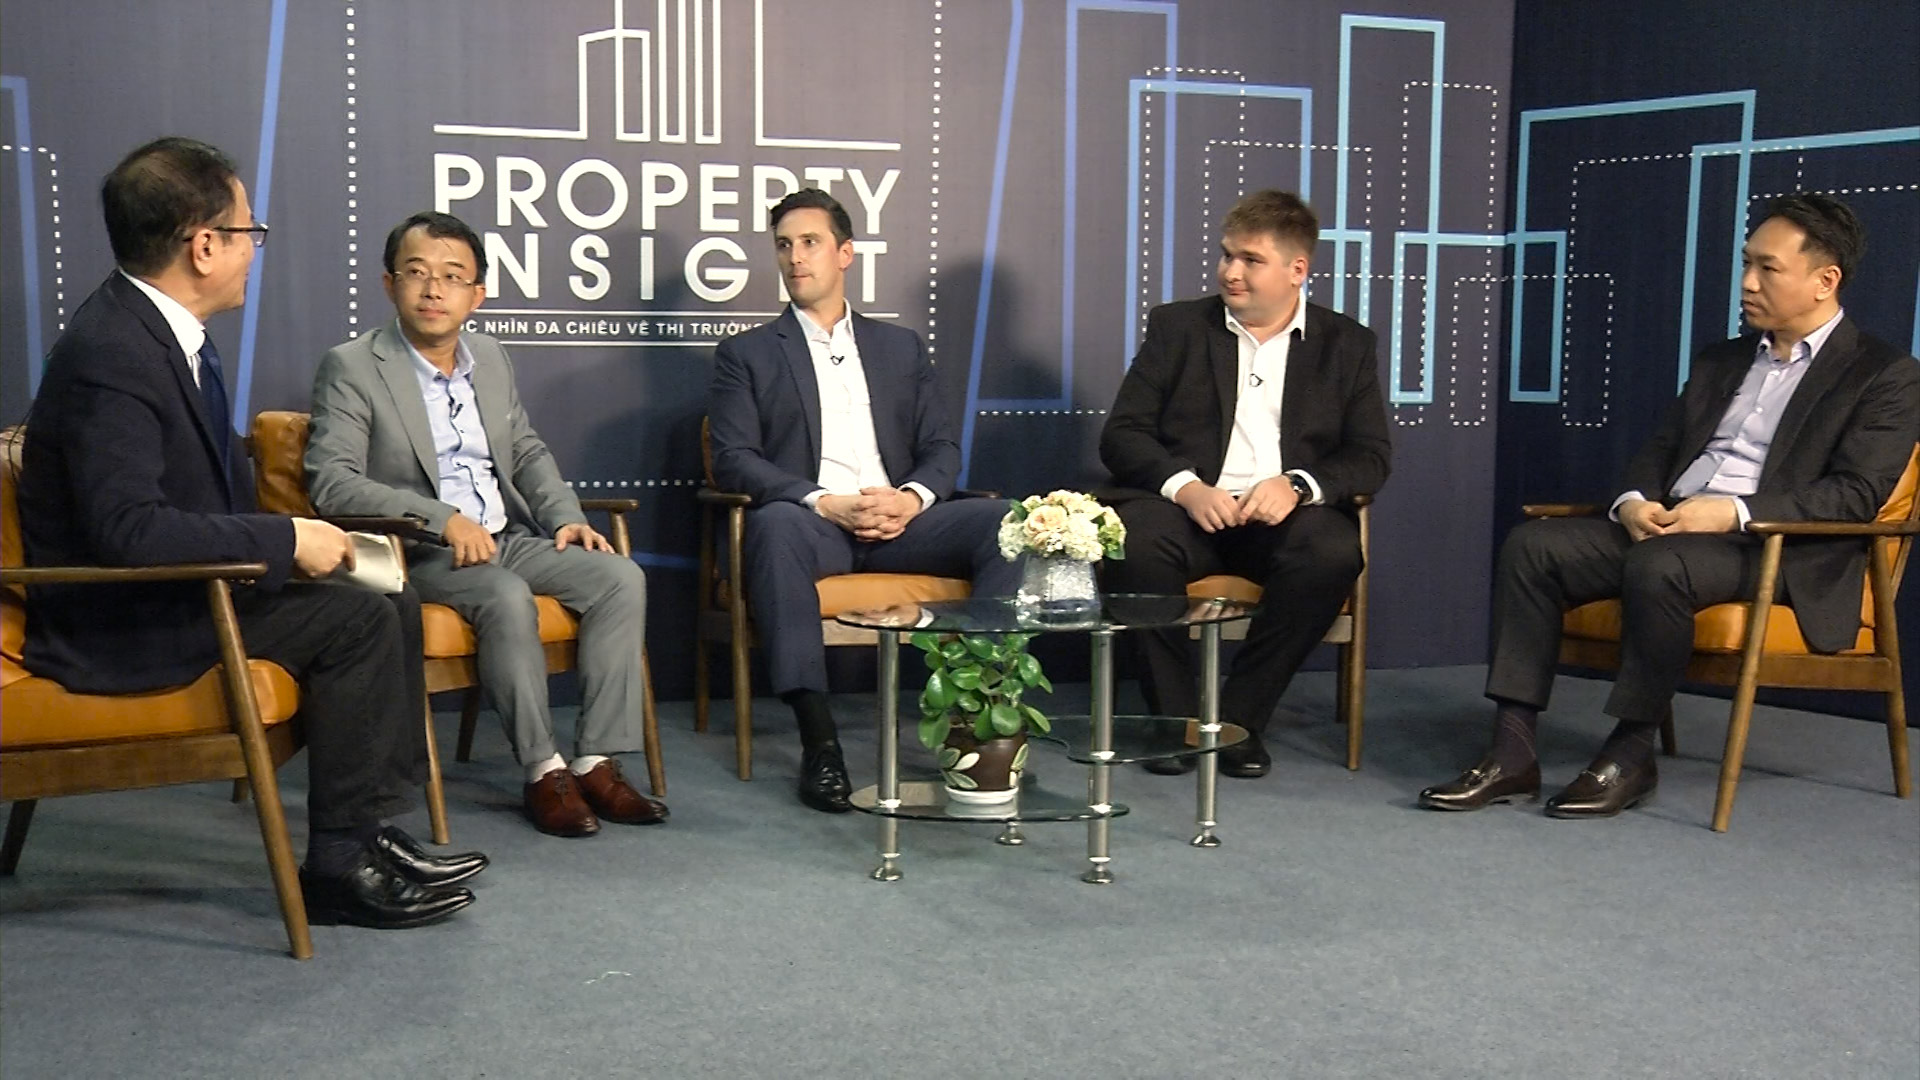 Dr Kavalchuk (2nd from right) discussed smart homes with four other experts in the fields of economics and property development.